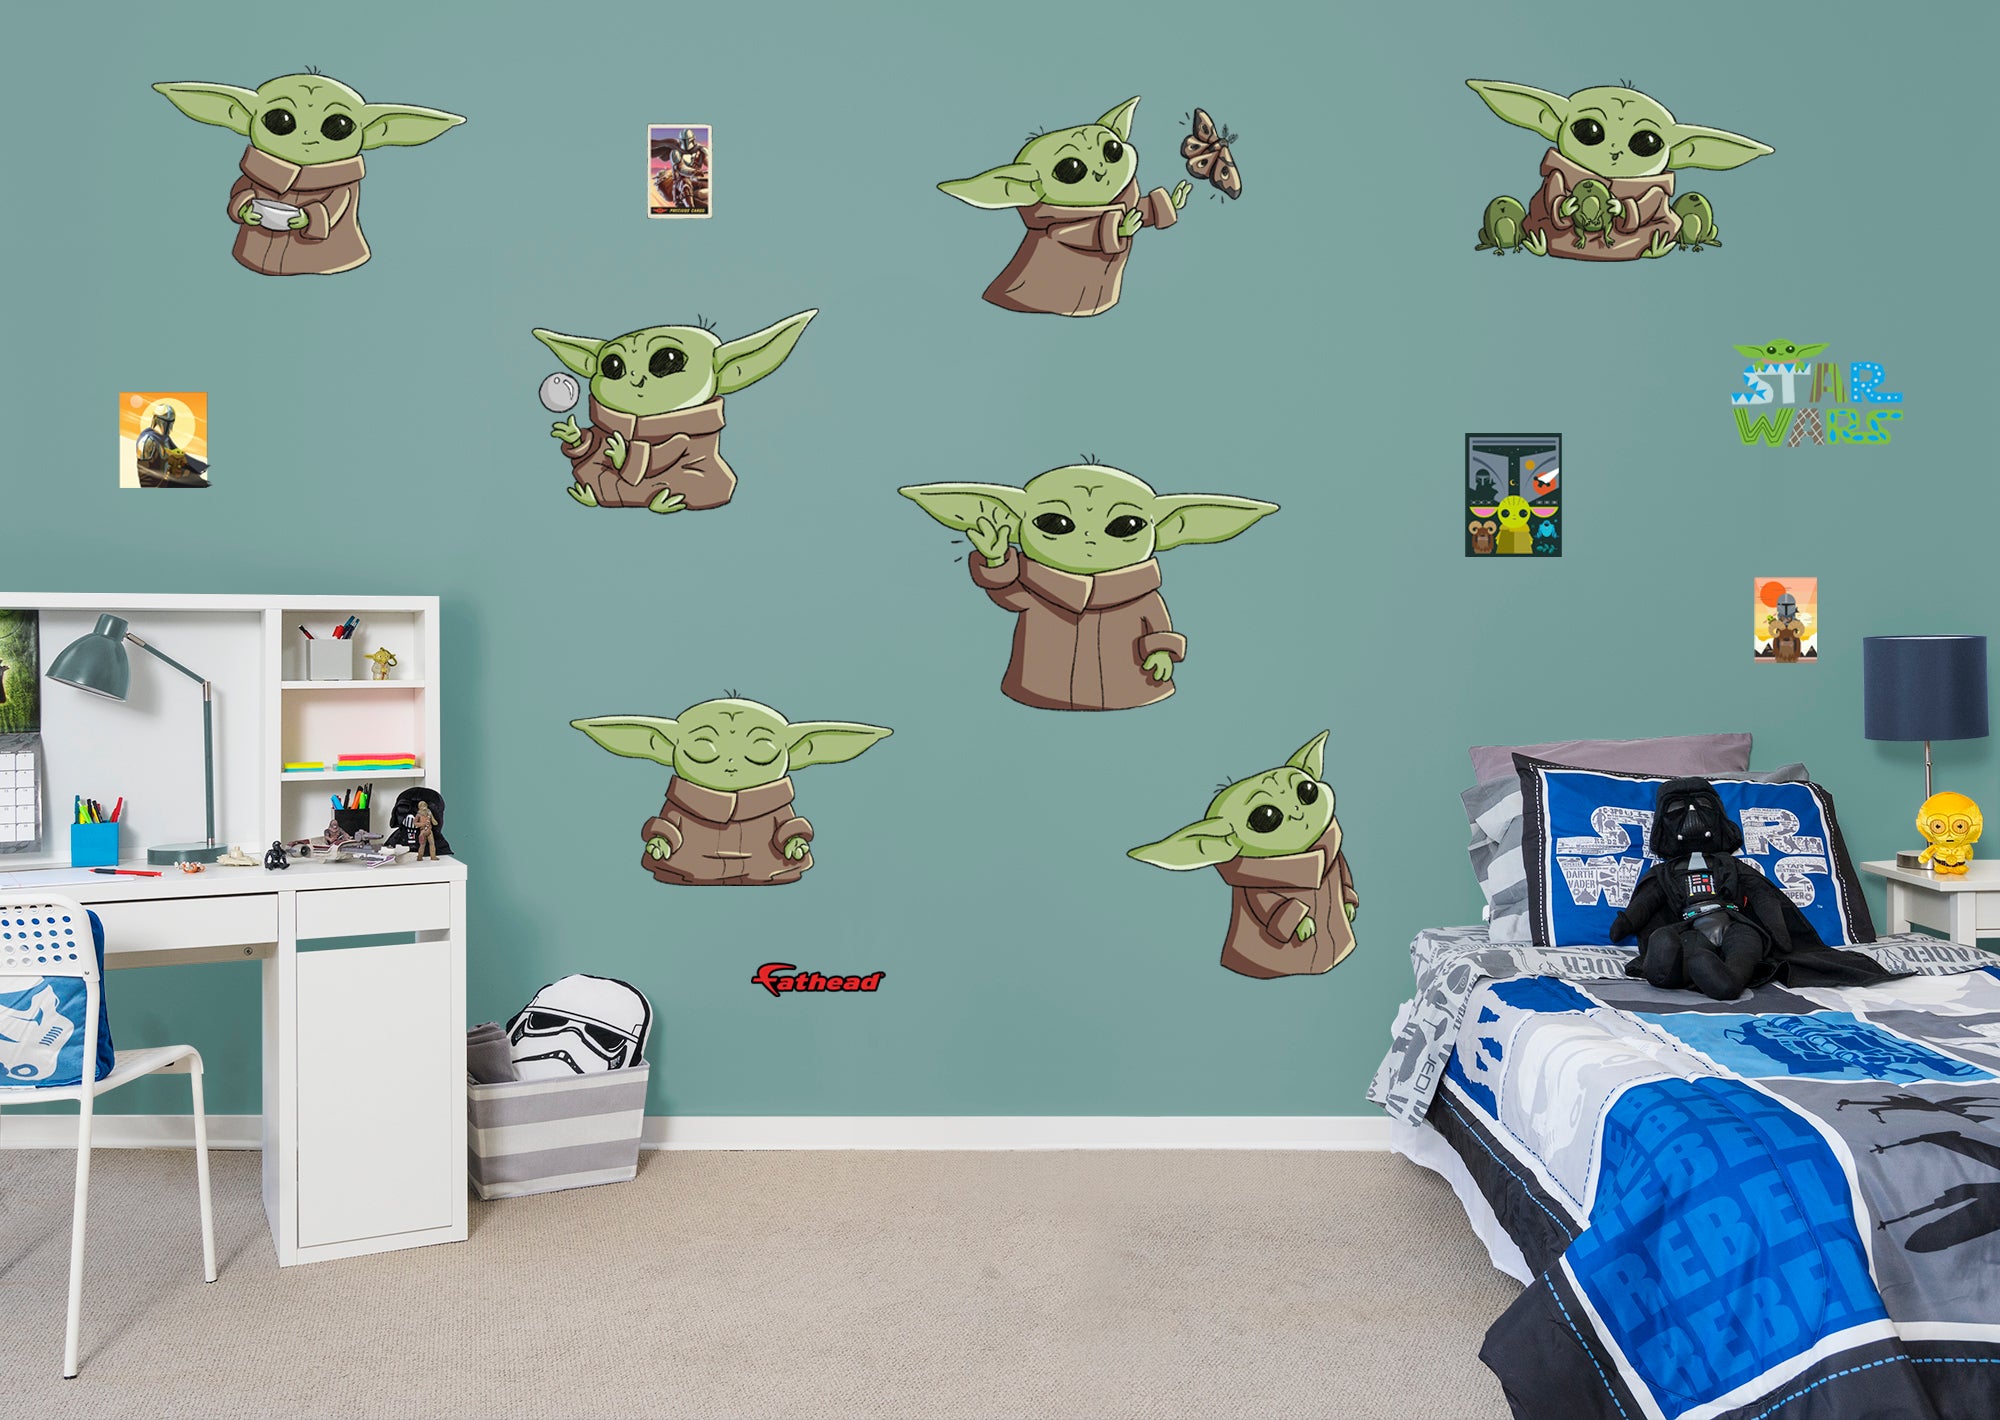 The Mandalorian The Child Cartoon Collection - Officially Licensed Star Wars Removable Wall Decal by Fathead | Vinyl